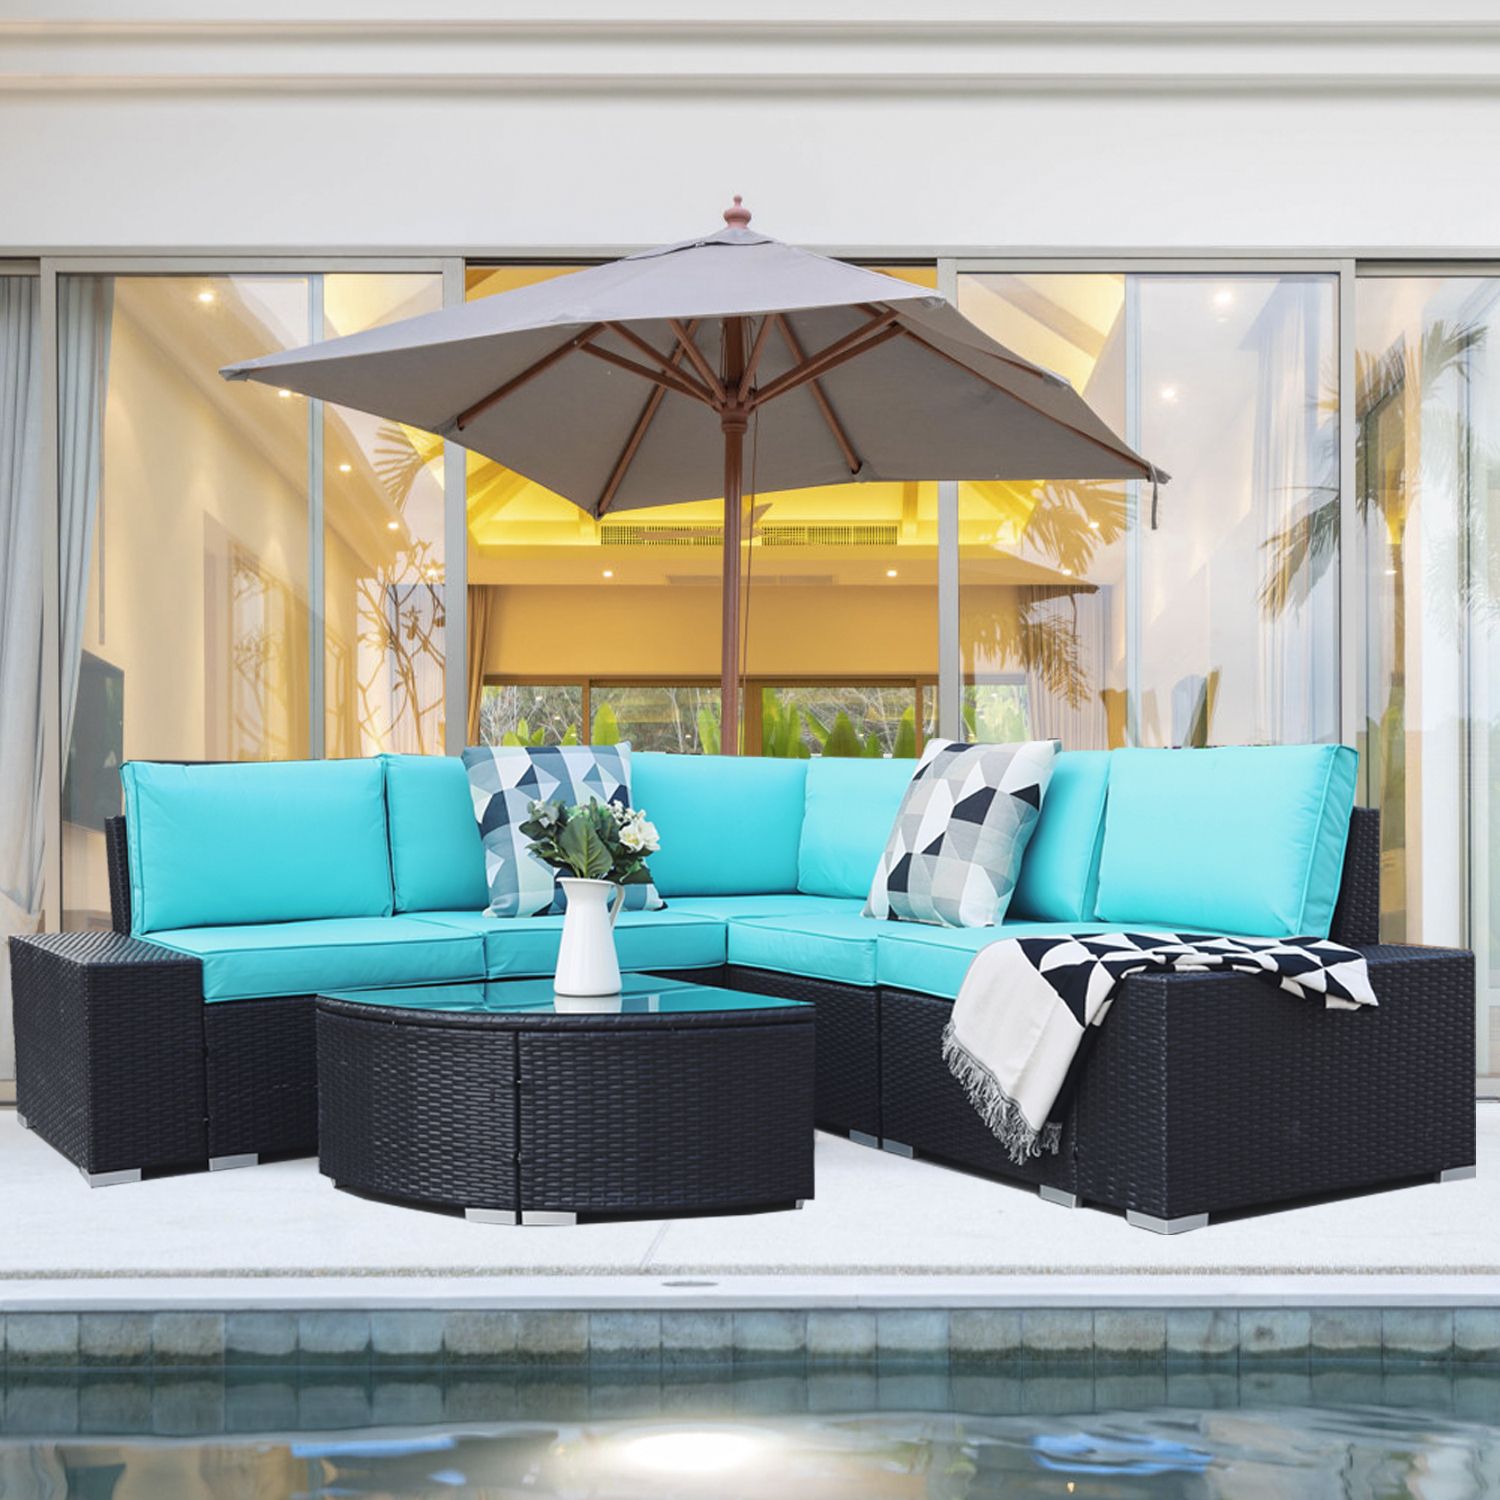 2019 6 Piece Outdoor Sectional Sofa Patio Sets Inside Uhomepro Outdoor Wicker Sectional Sofa Set, 6 Piece Patio Furniture (View 15 of 15)